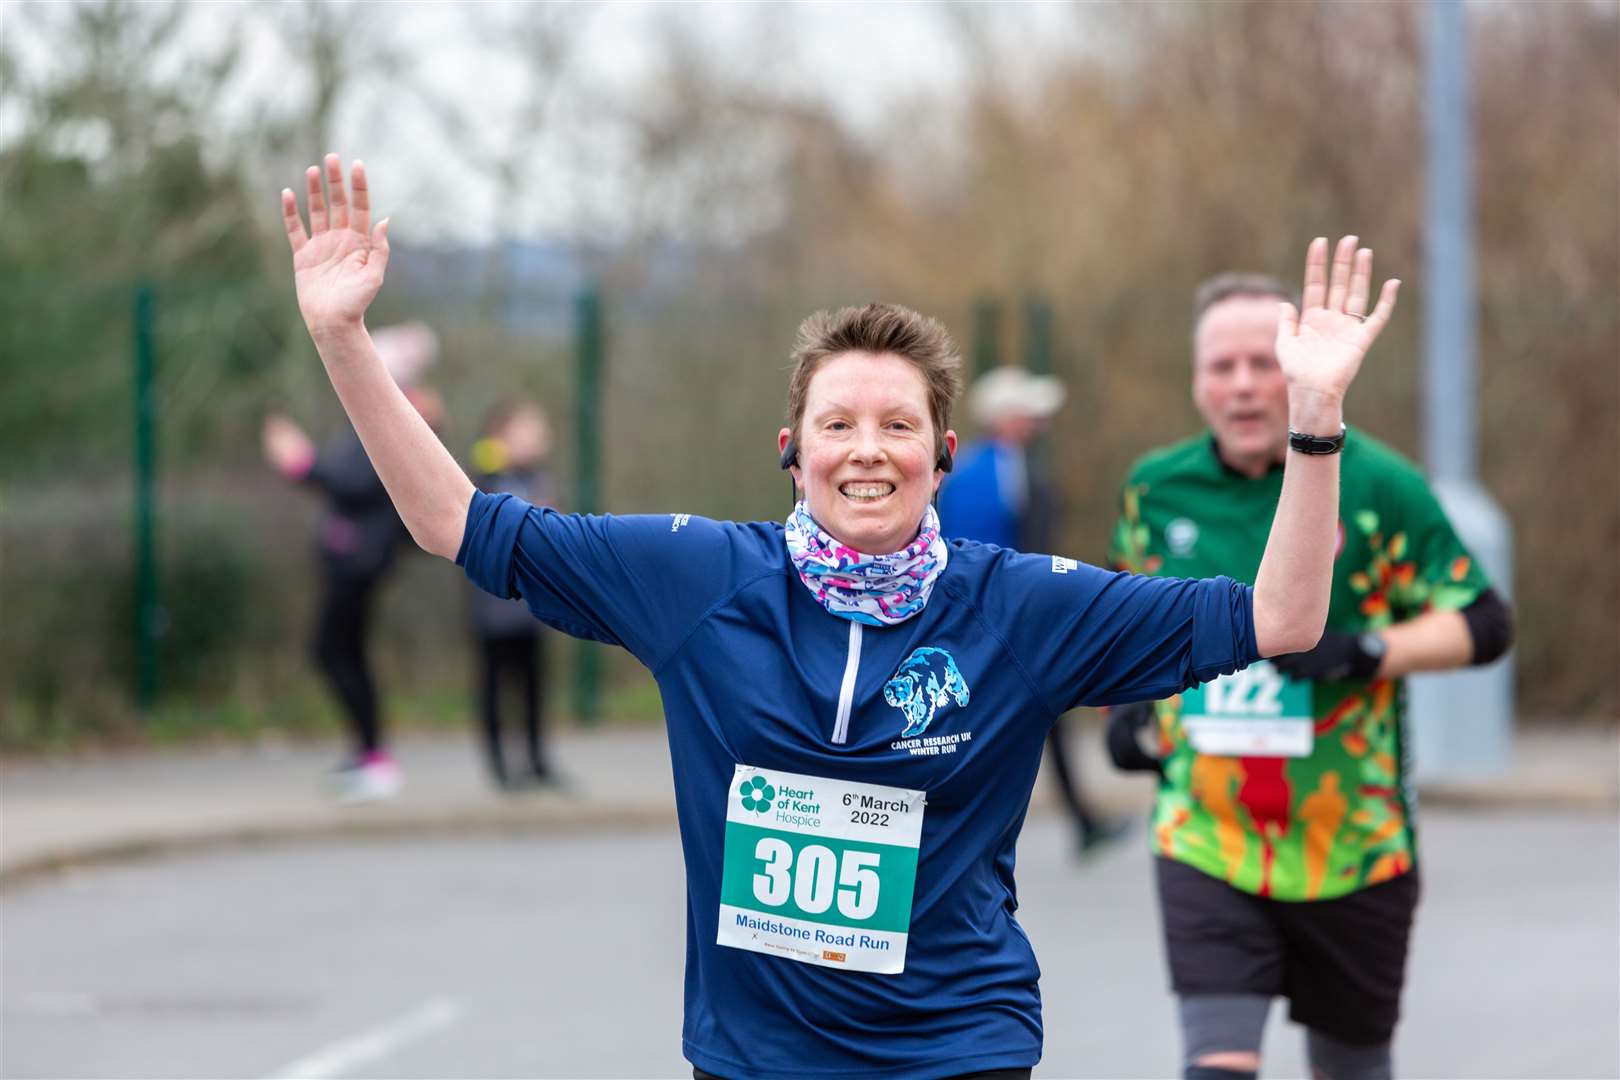 Former sports minister Tracey Crouch at the Heart of Kent Hospice road race 2022